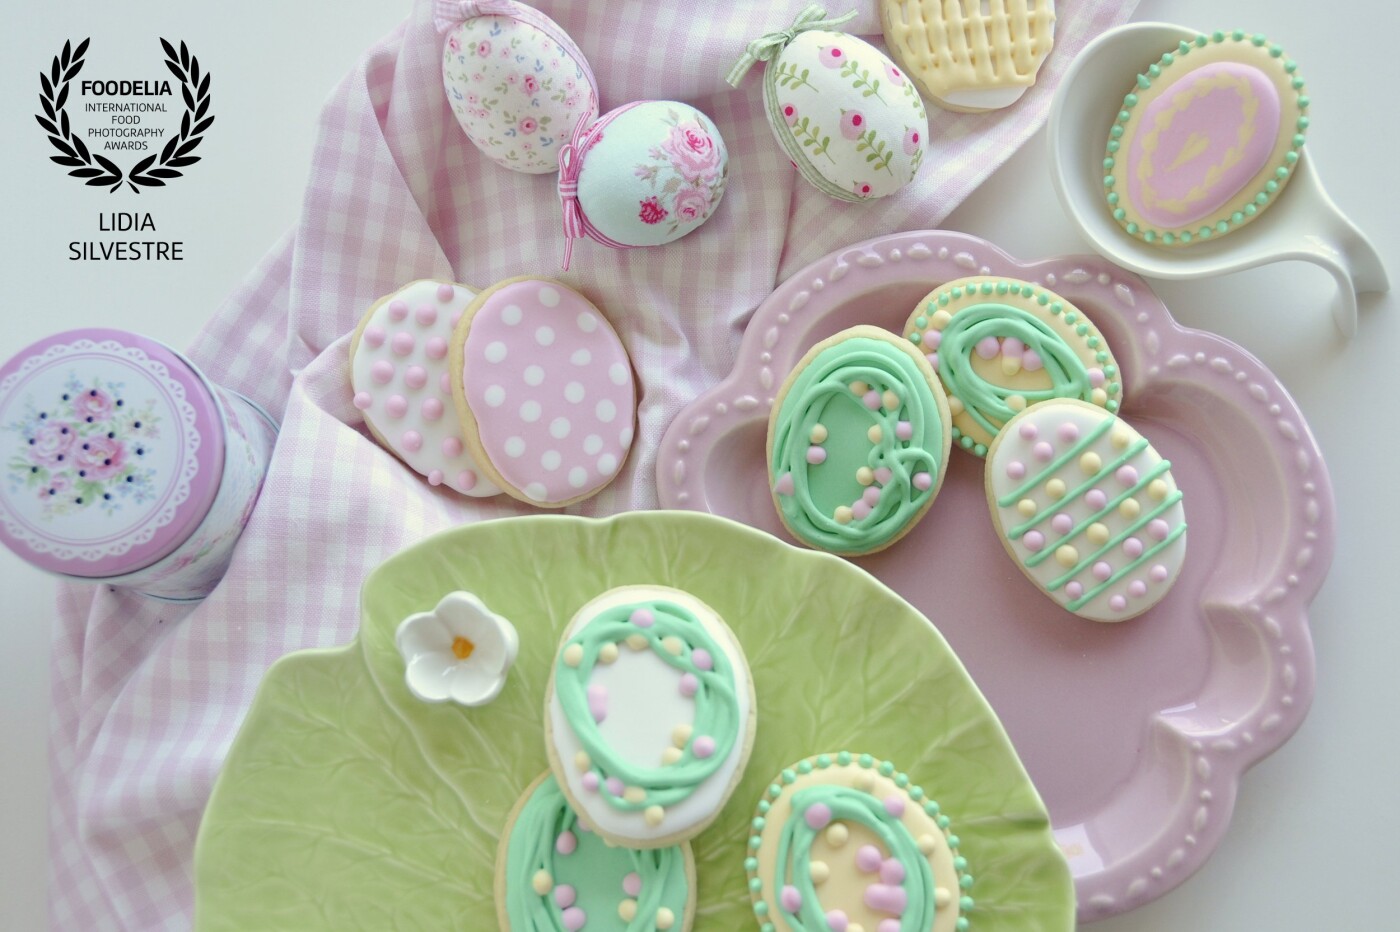 I have made these butter cookies for Easter. They were decorated with royal icing, using light Spring tones. I love the props used in this photo and I believe they complement my cookies perfectly. 